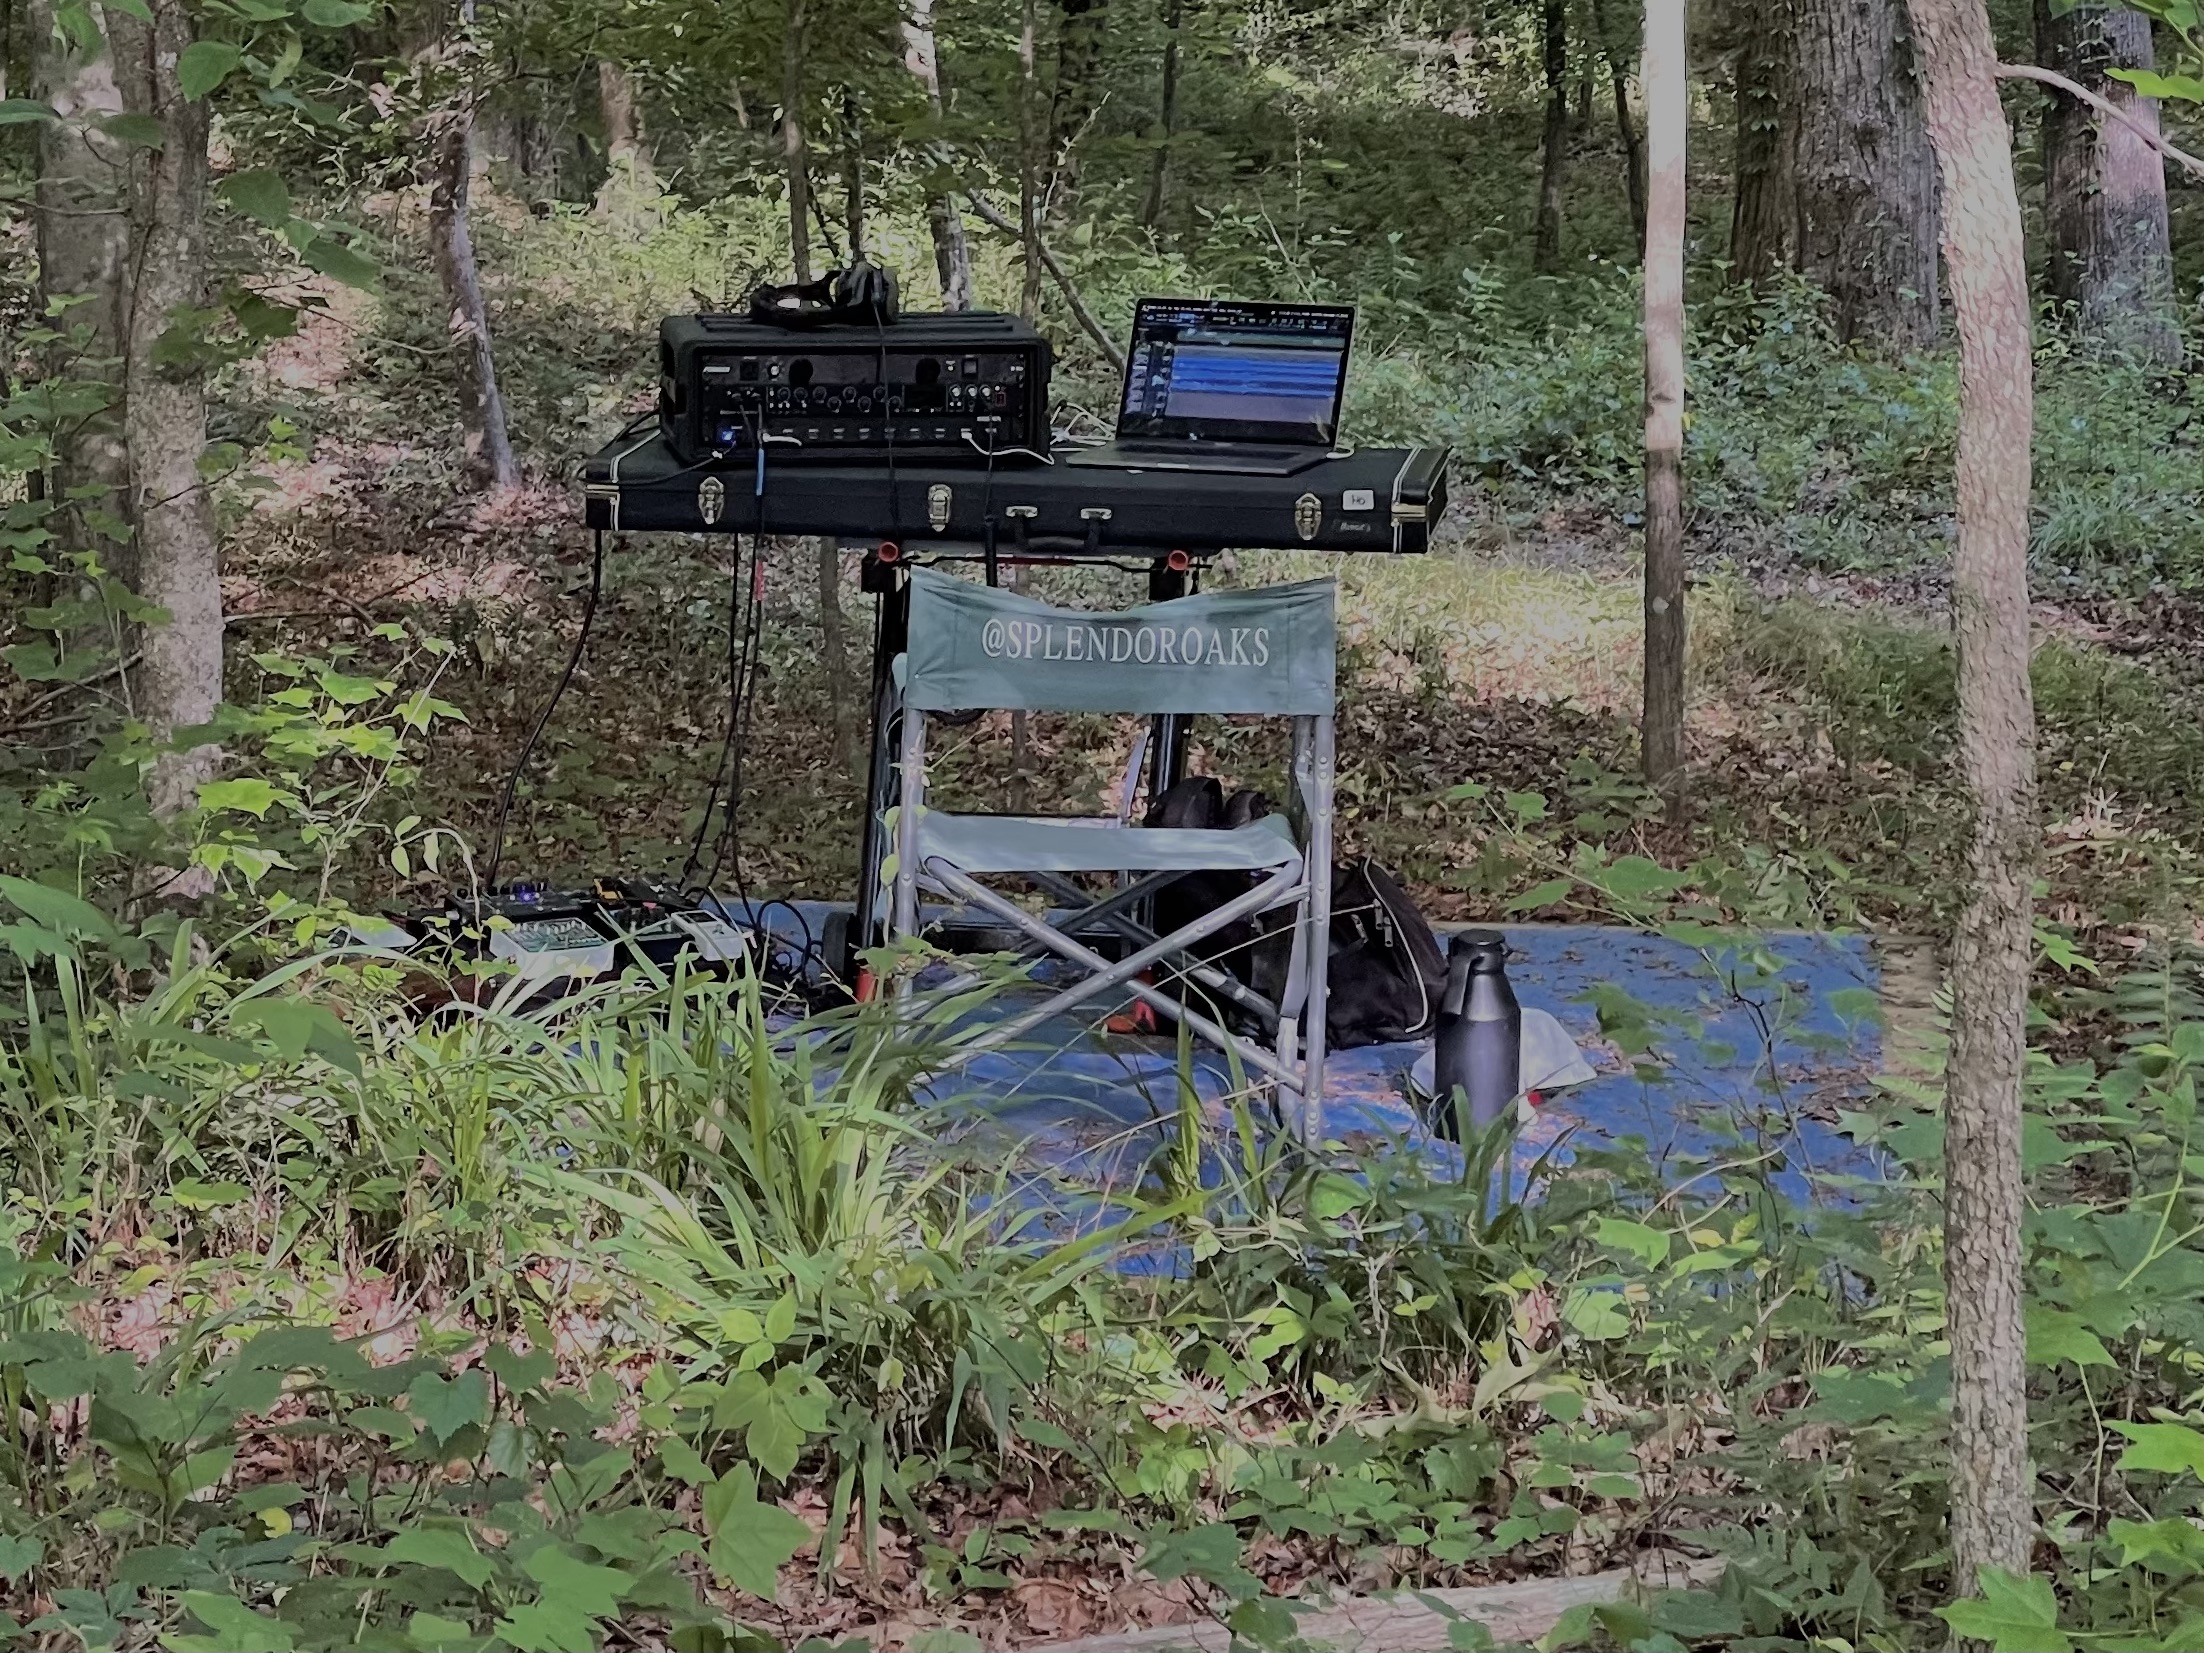 Setup from a distance